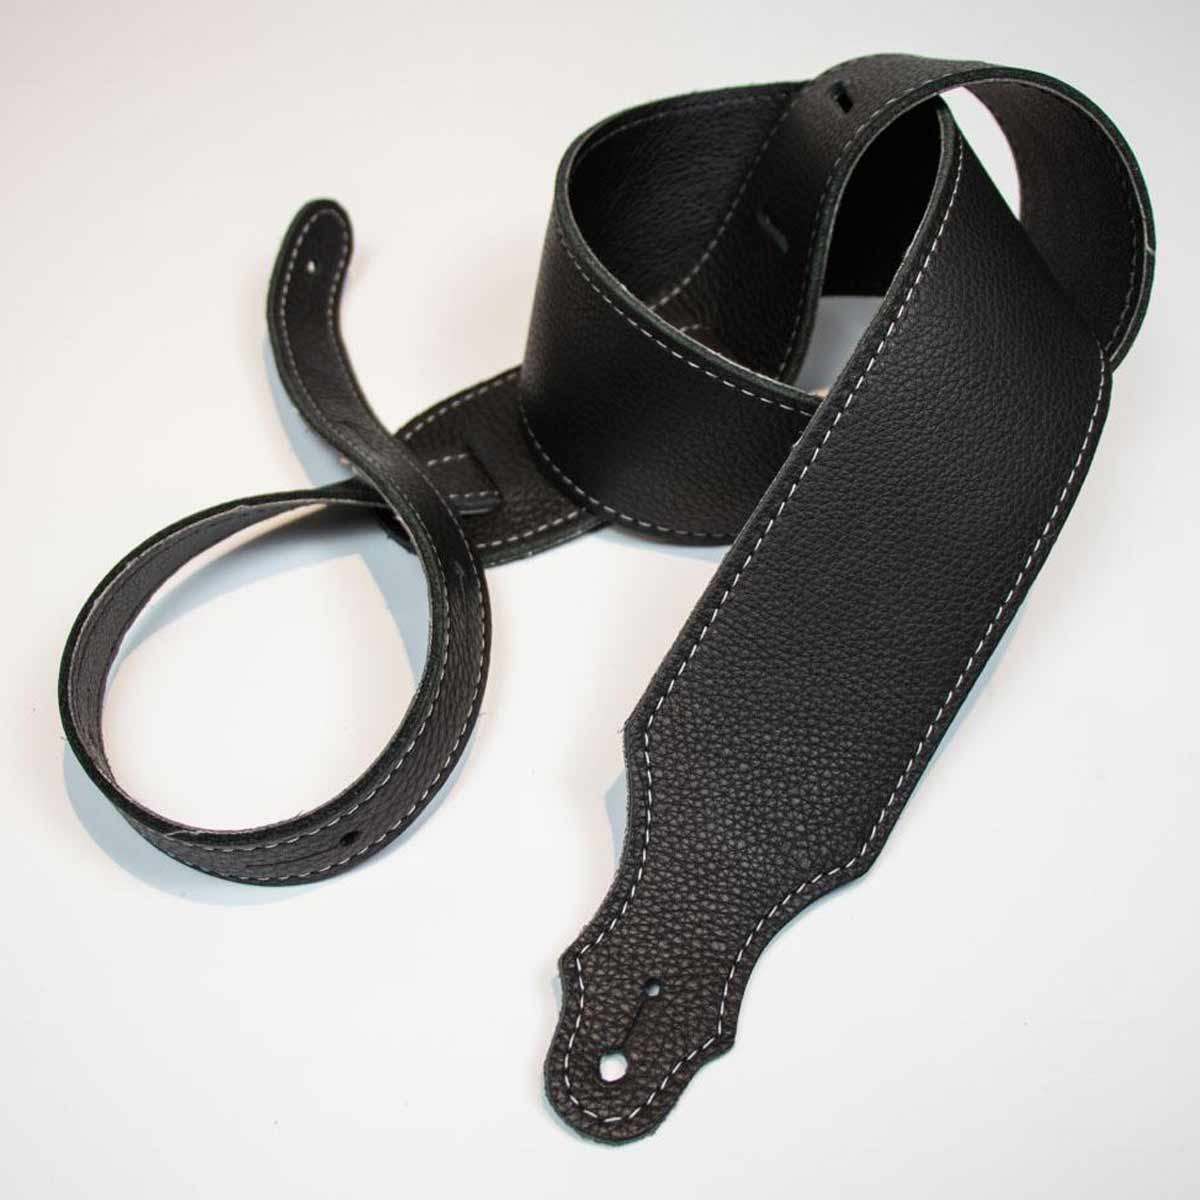 Franklin Purist Glove Leather Guitar Strap Black with Silver Stitching 4BBKS | Andy's Music